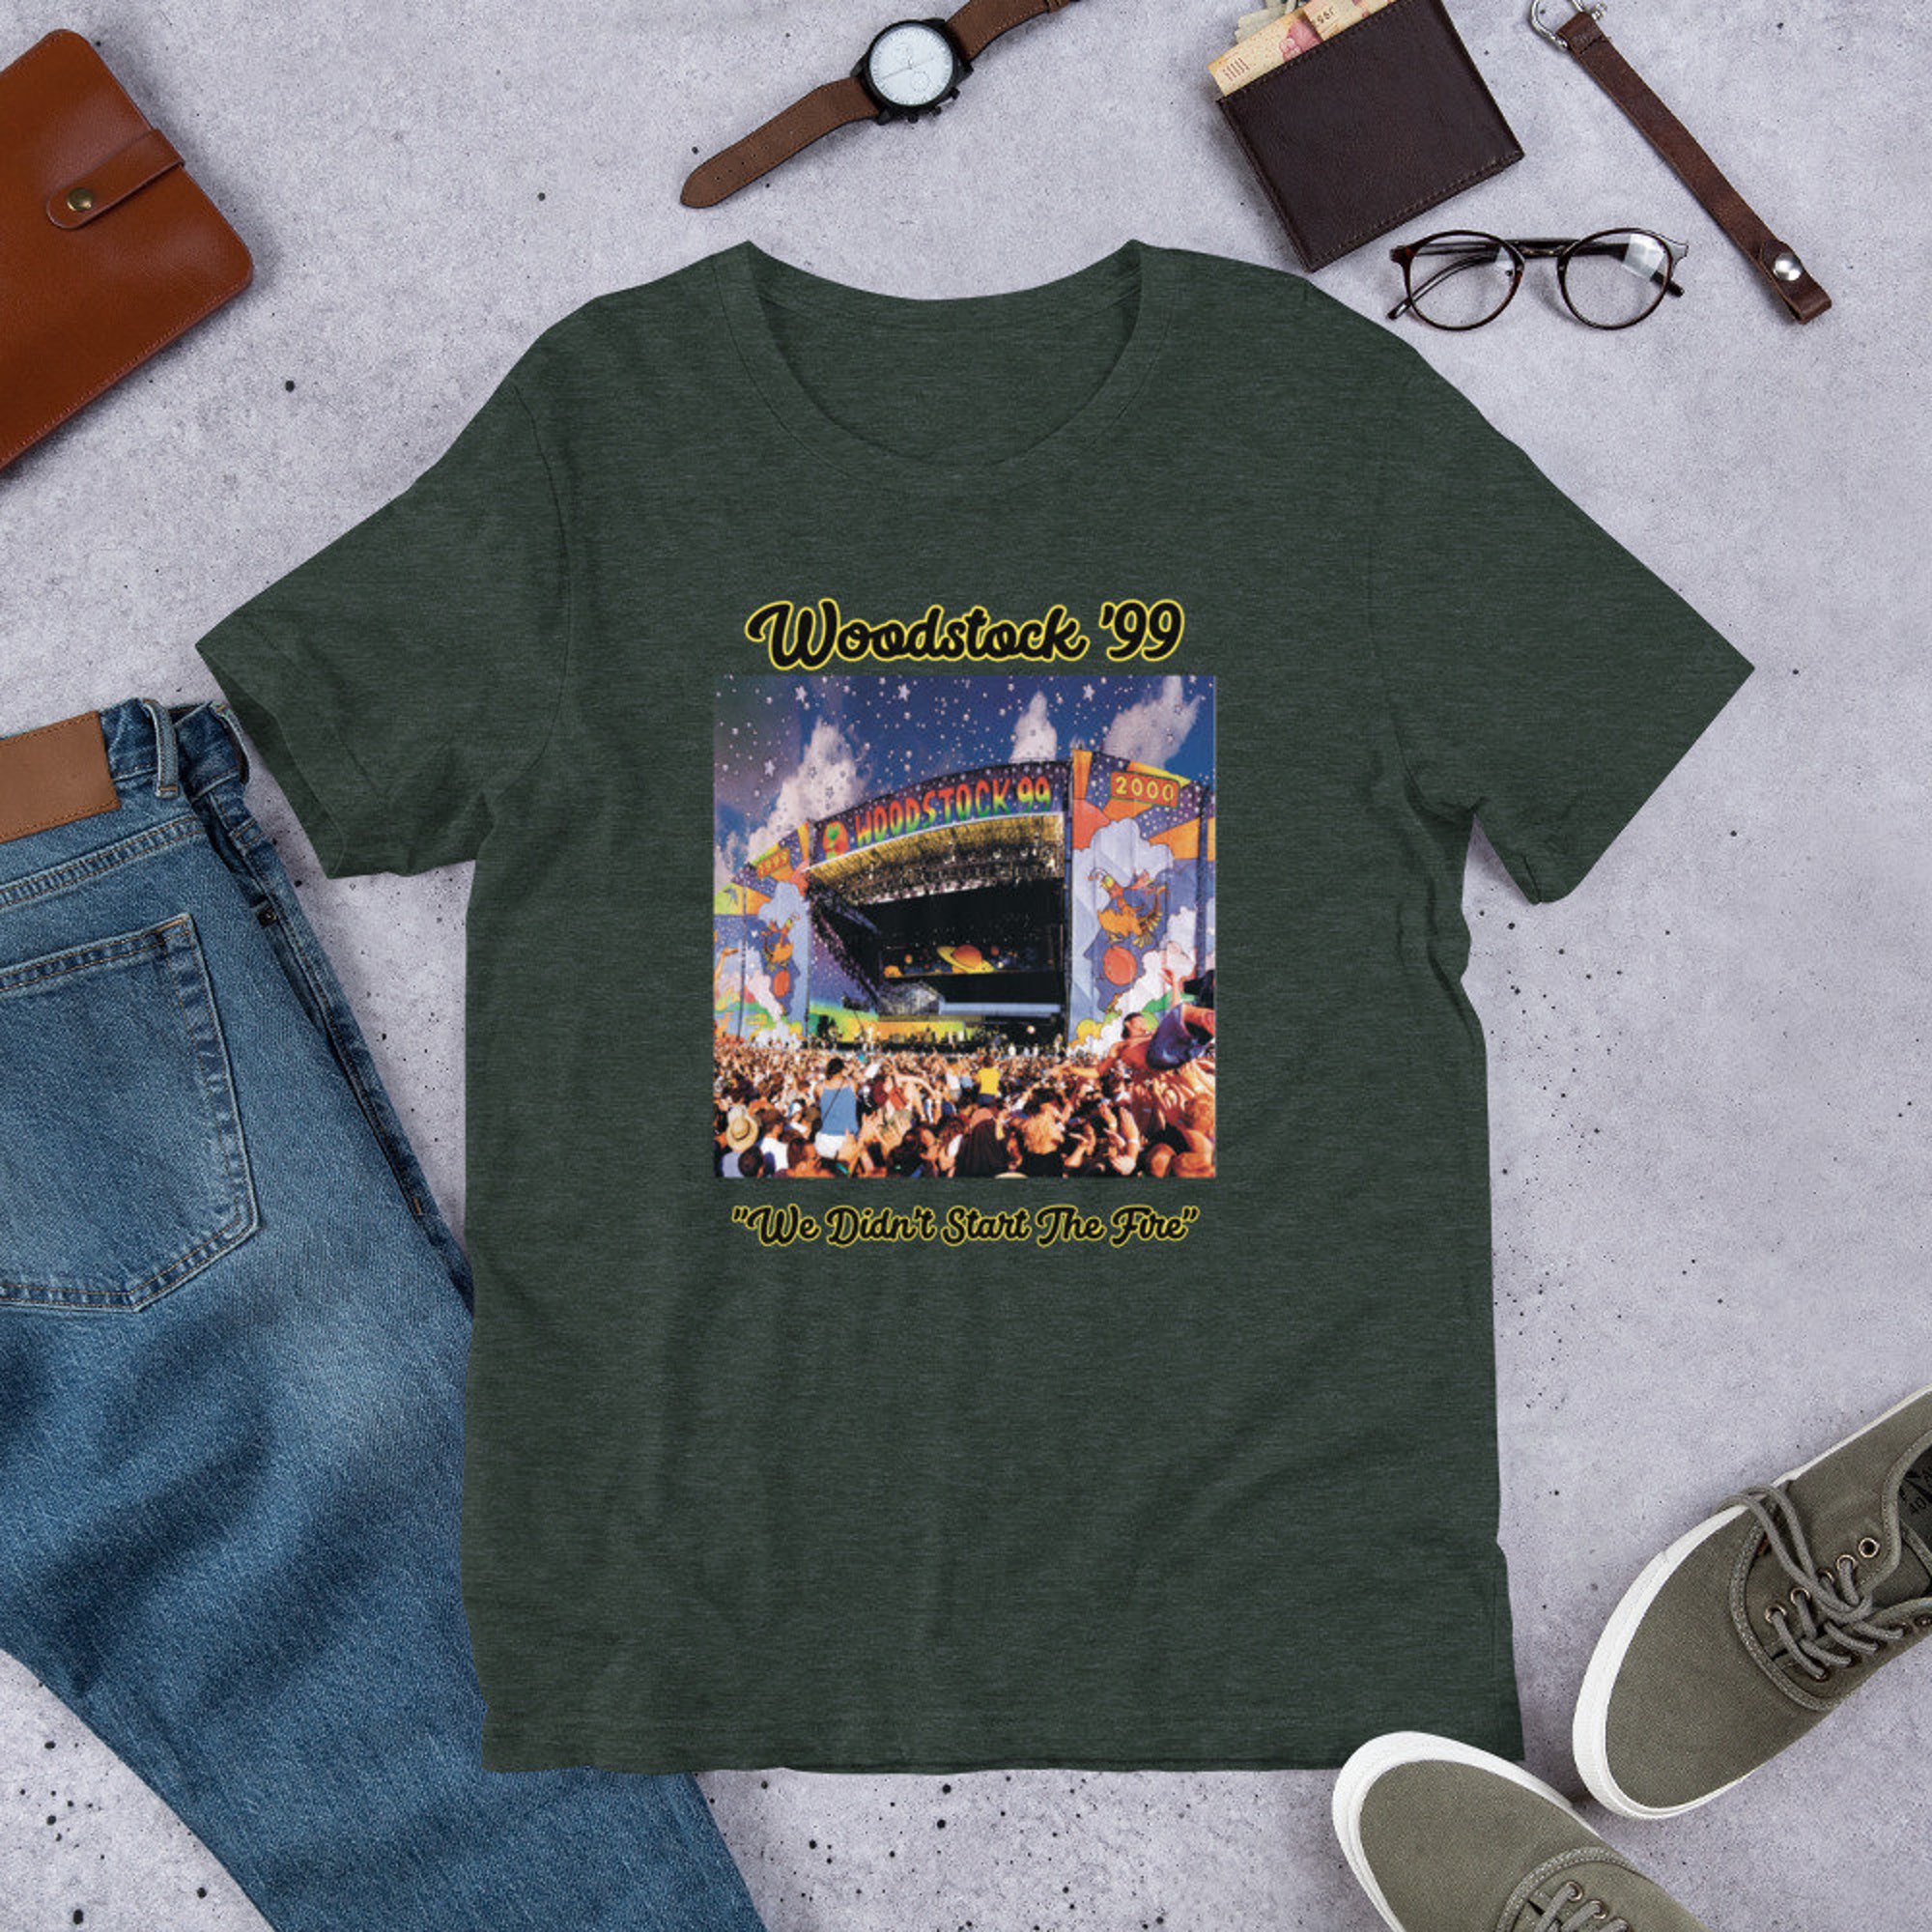 Discover Woodstock '99 - We Didn't Start The Fire - Festival T-Shirt - Fun Retro - Historical -